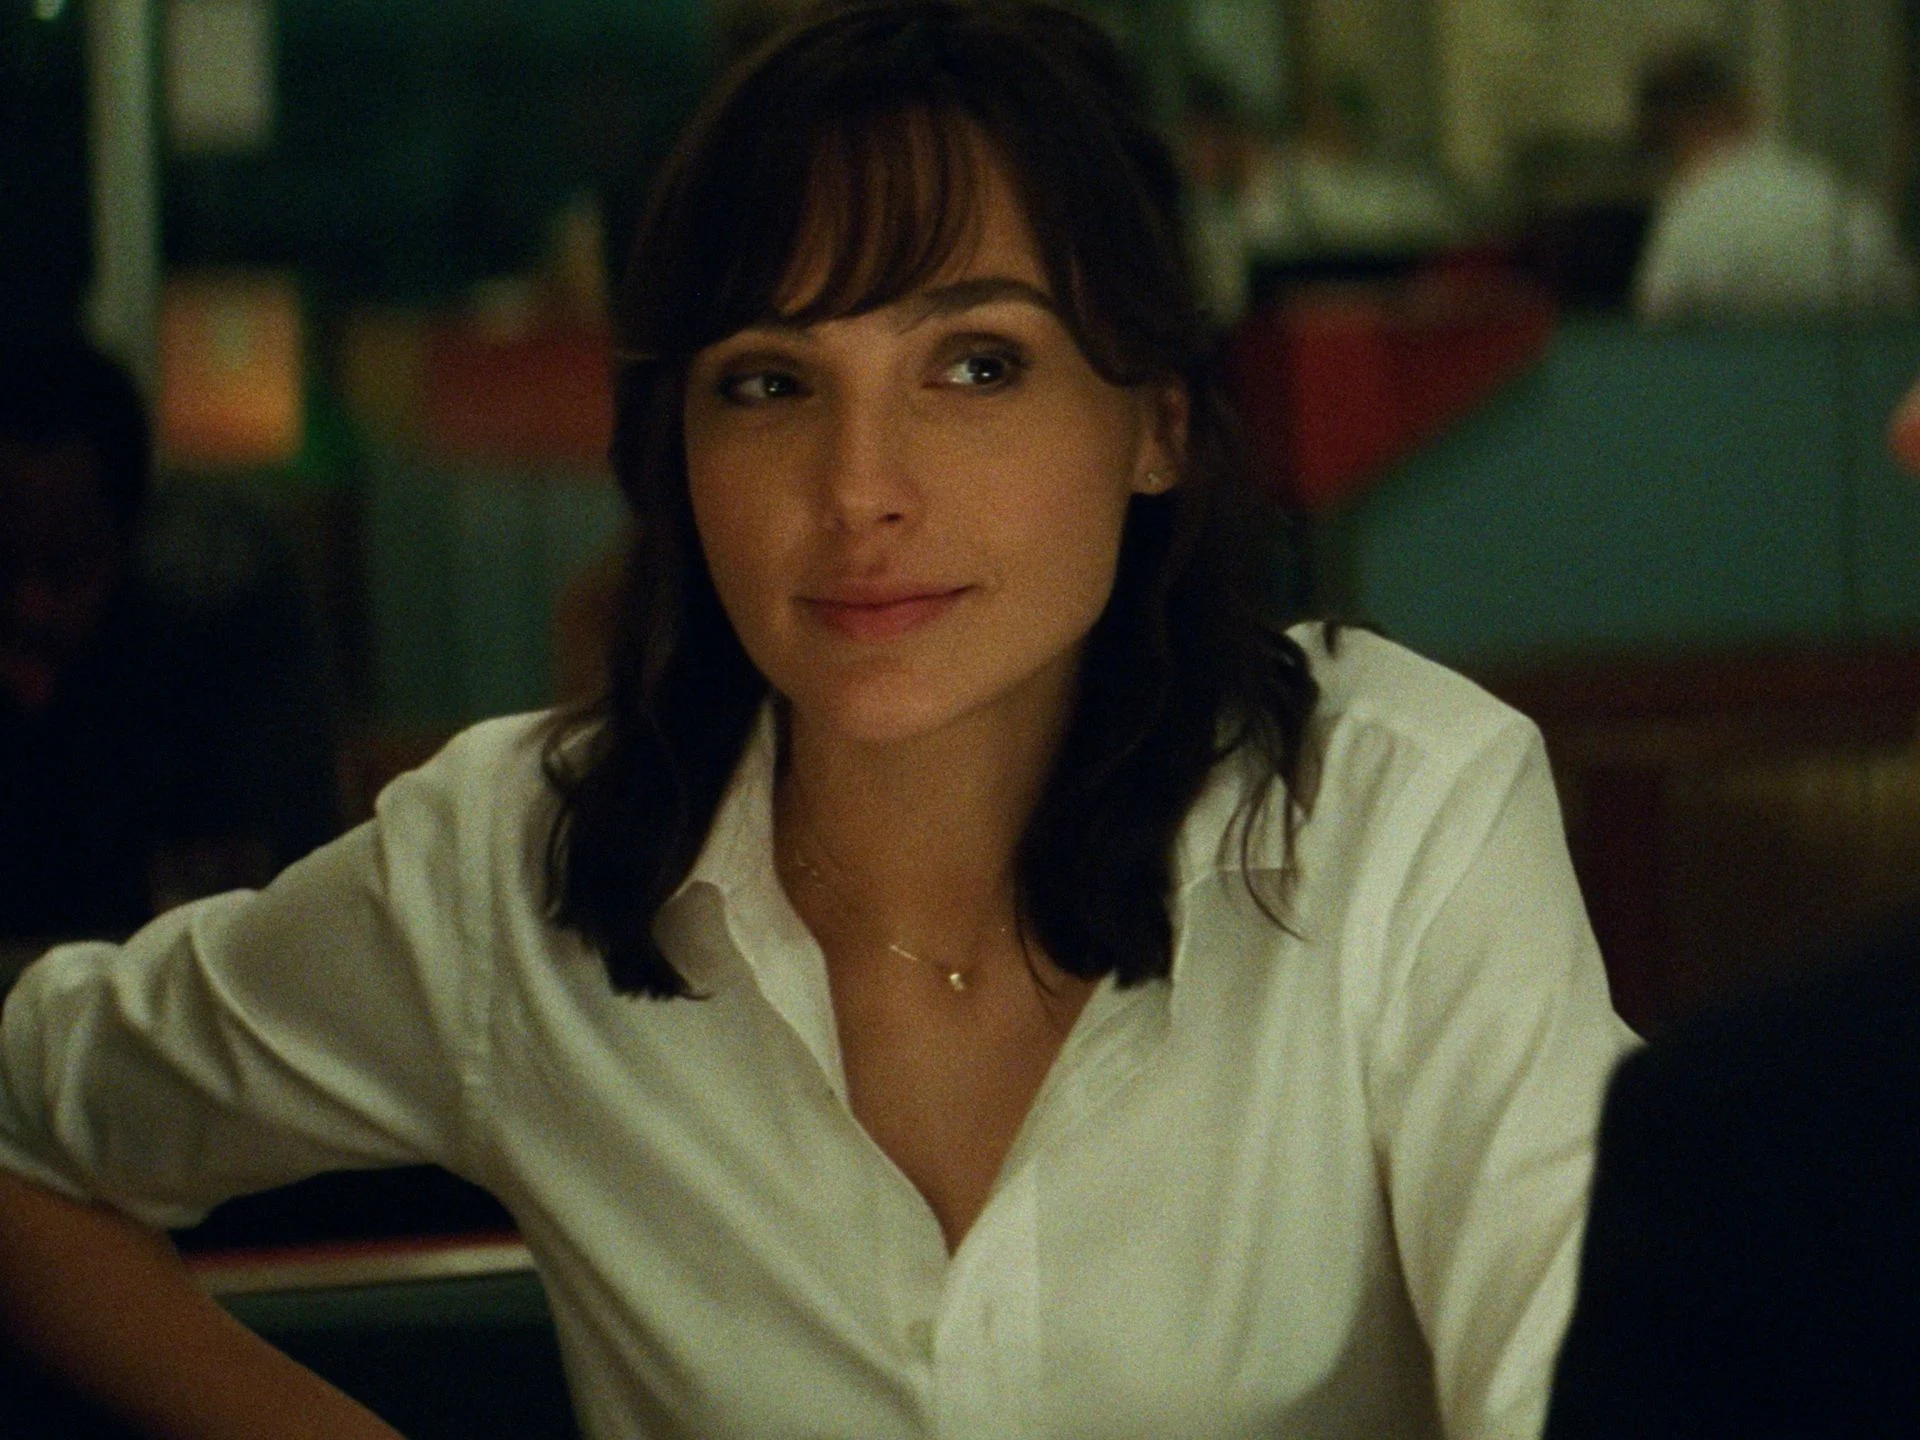 Gal Gadot in Heart of Stone